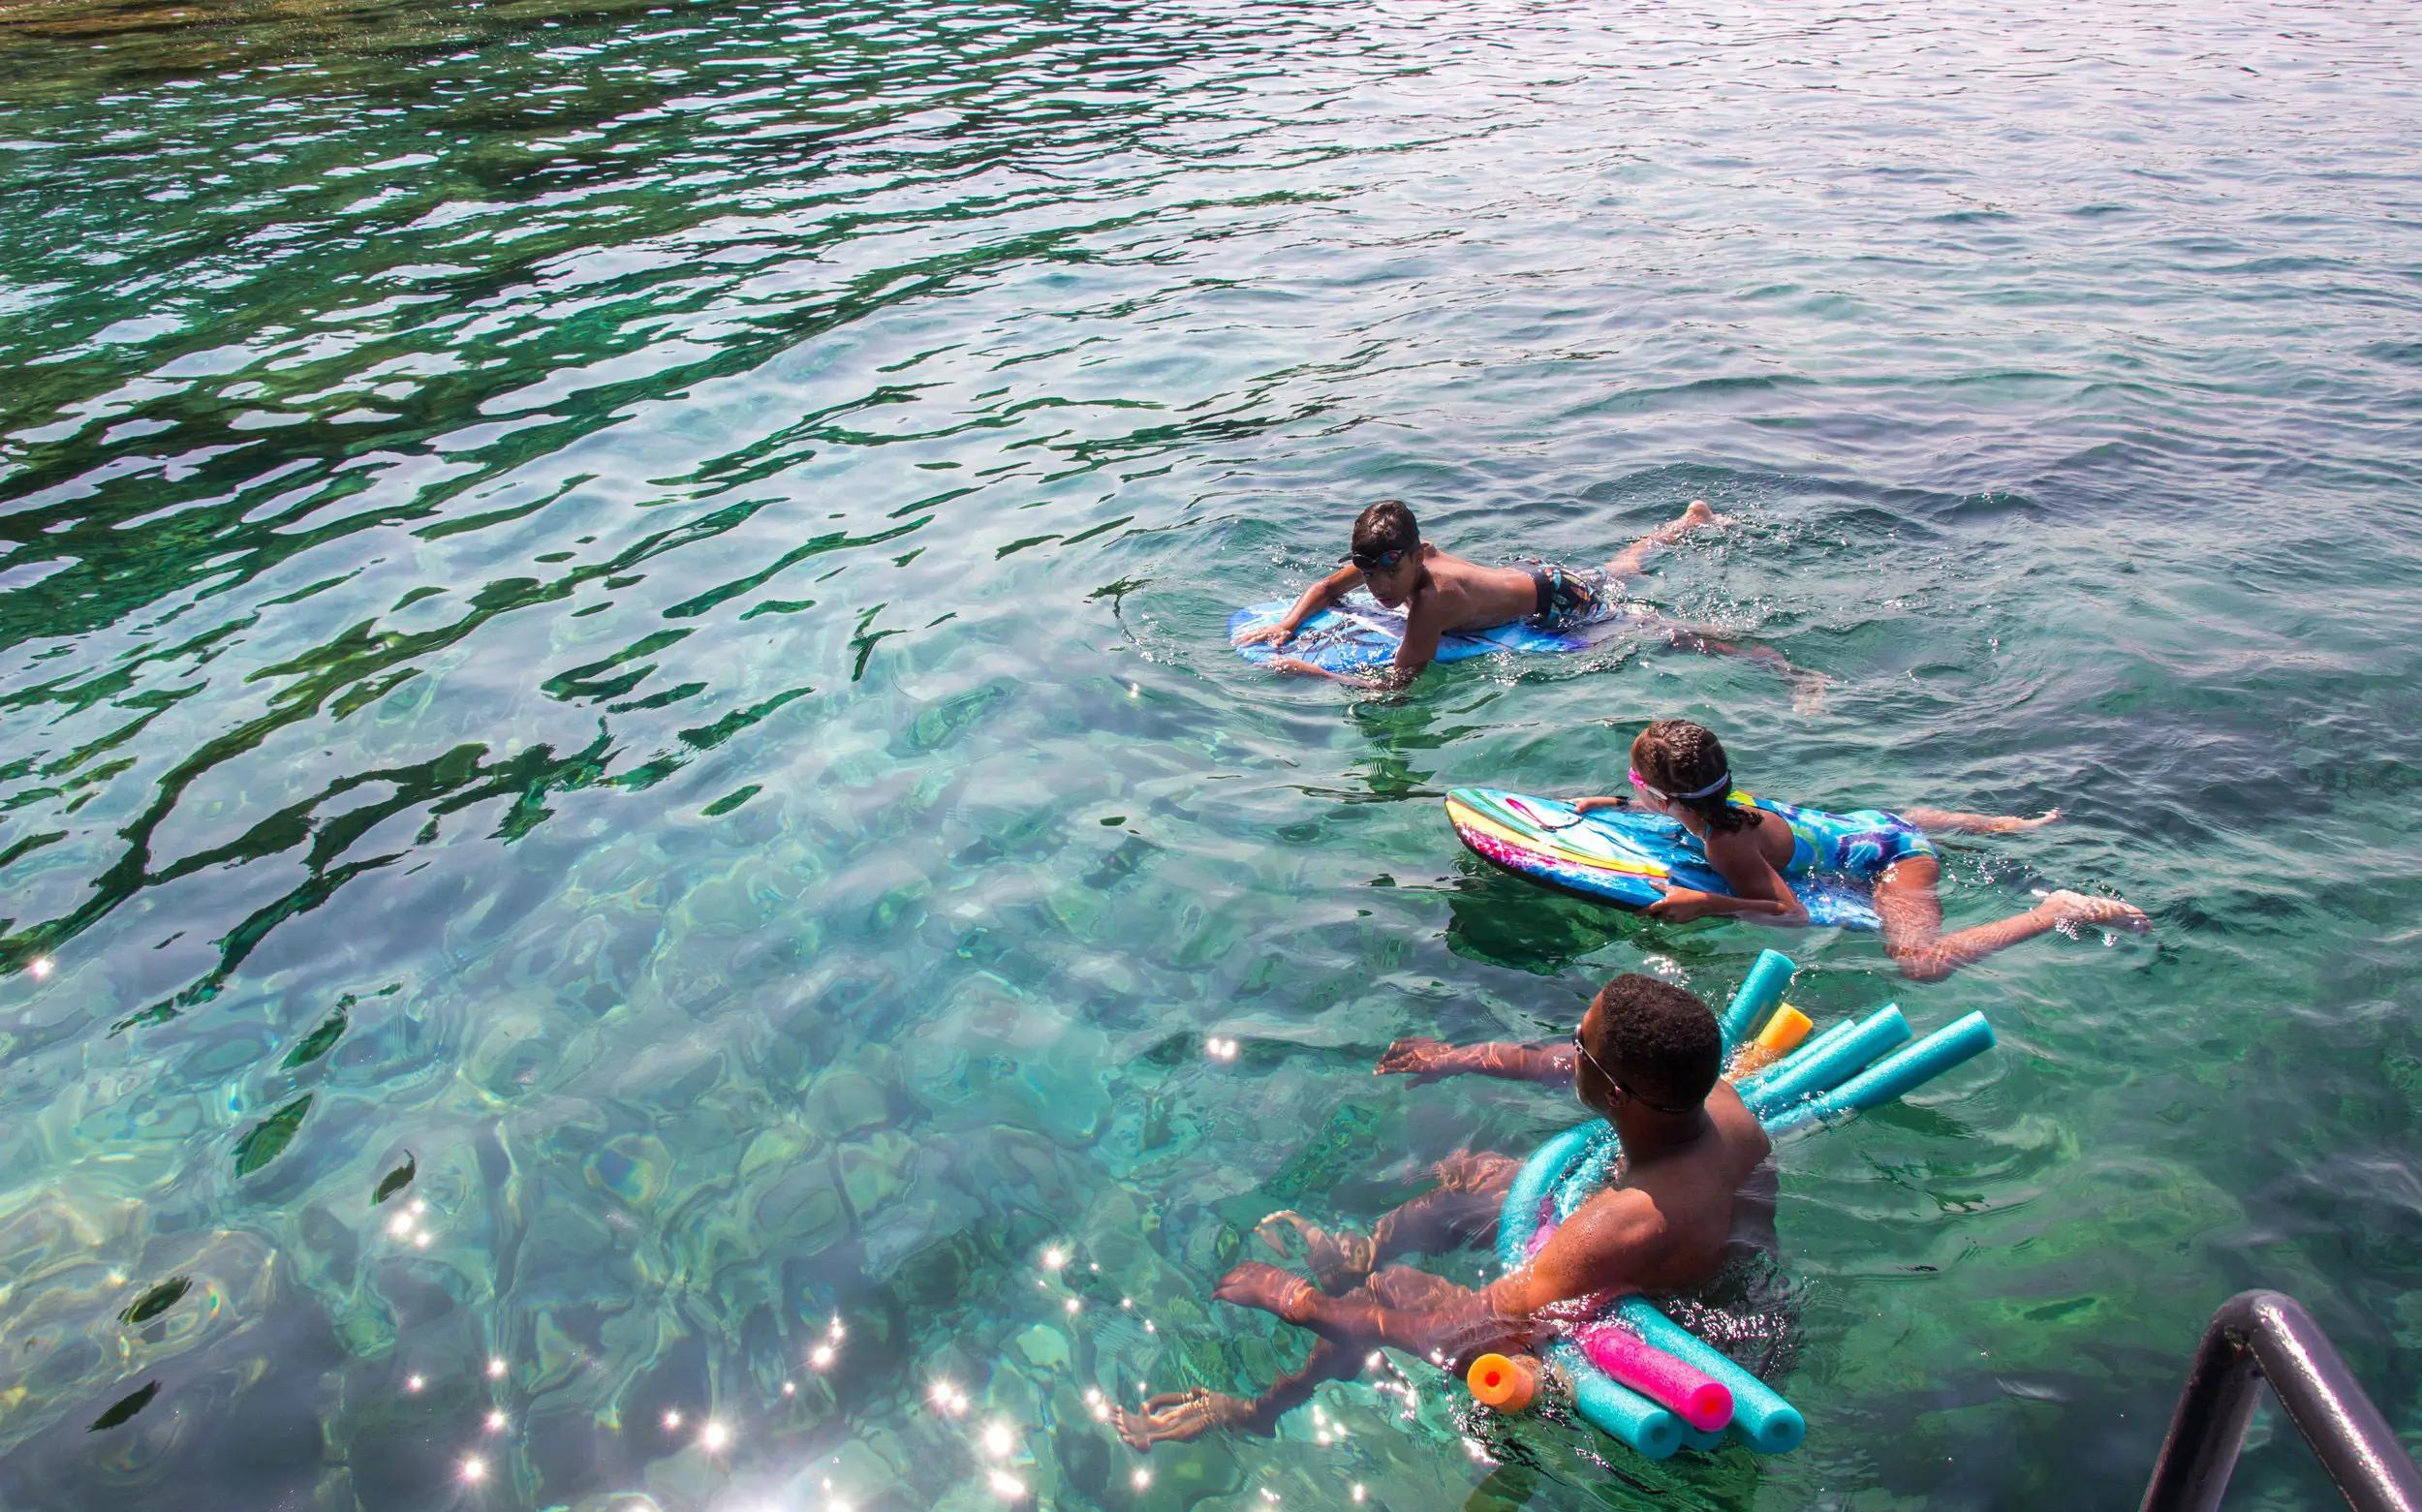 A dad with his son and daughter swimming in crystal-clear water.